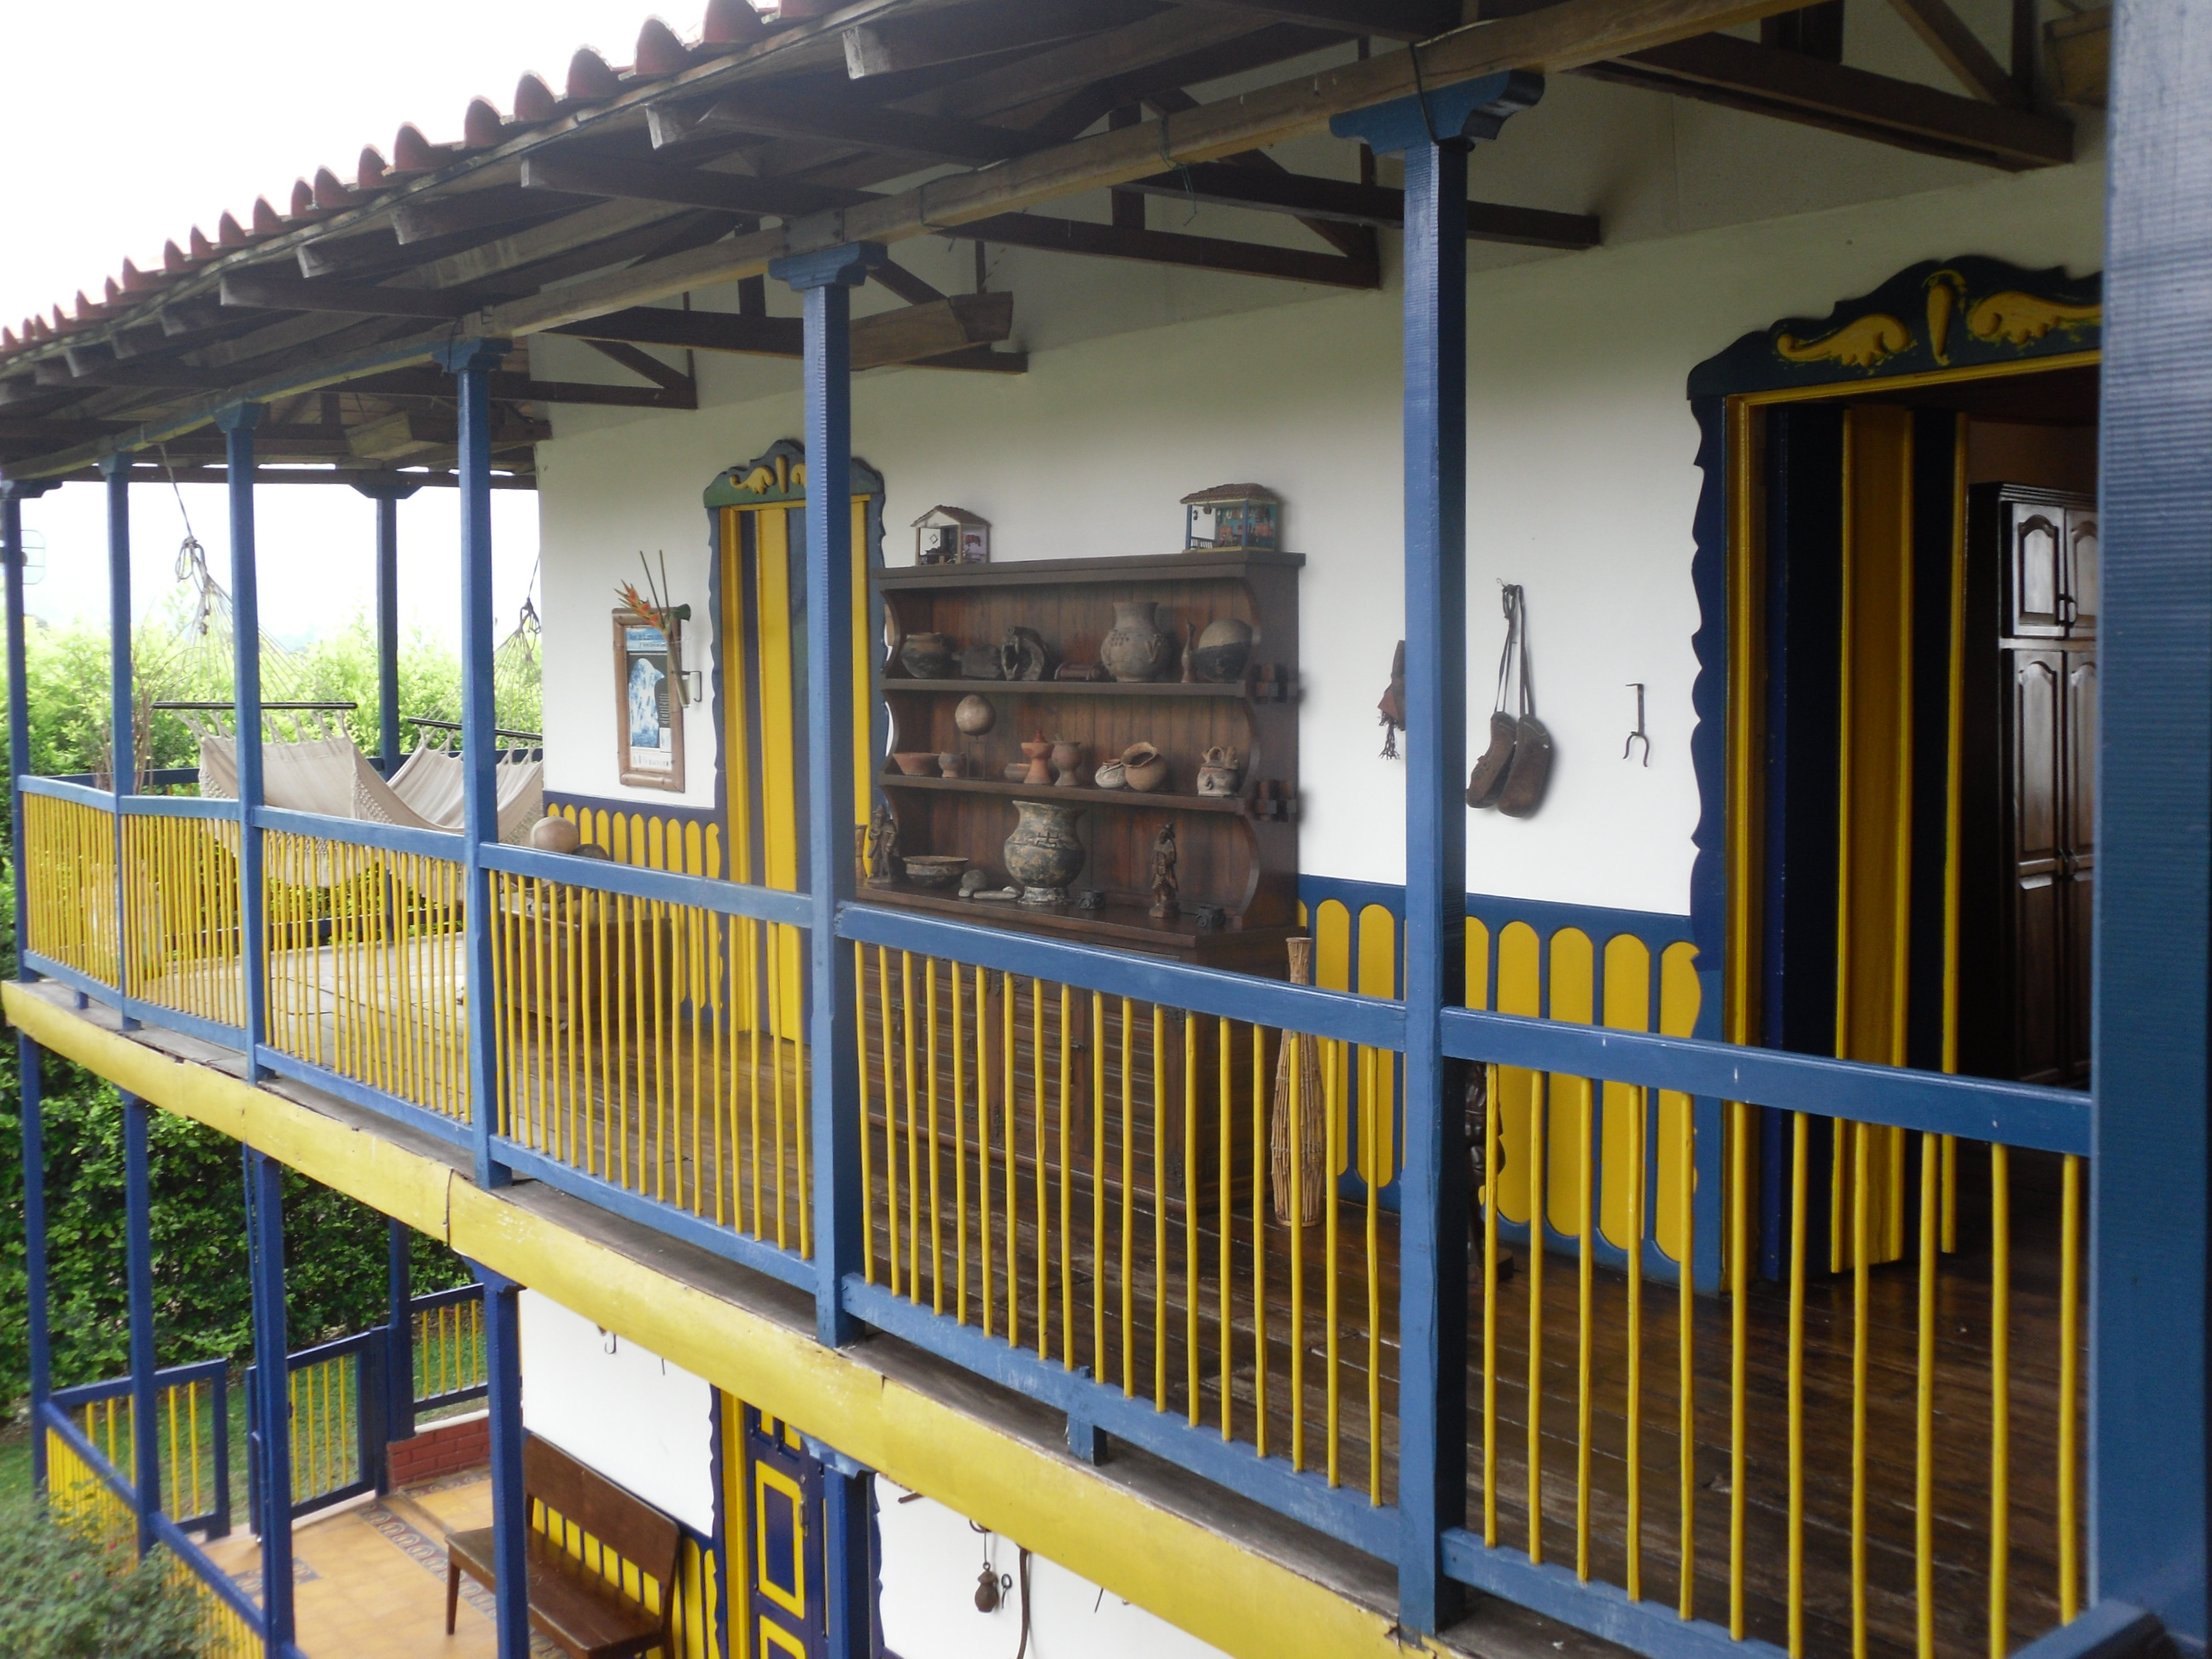 Typical hacienda lodging in the coffee country of Colombia